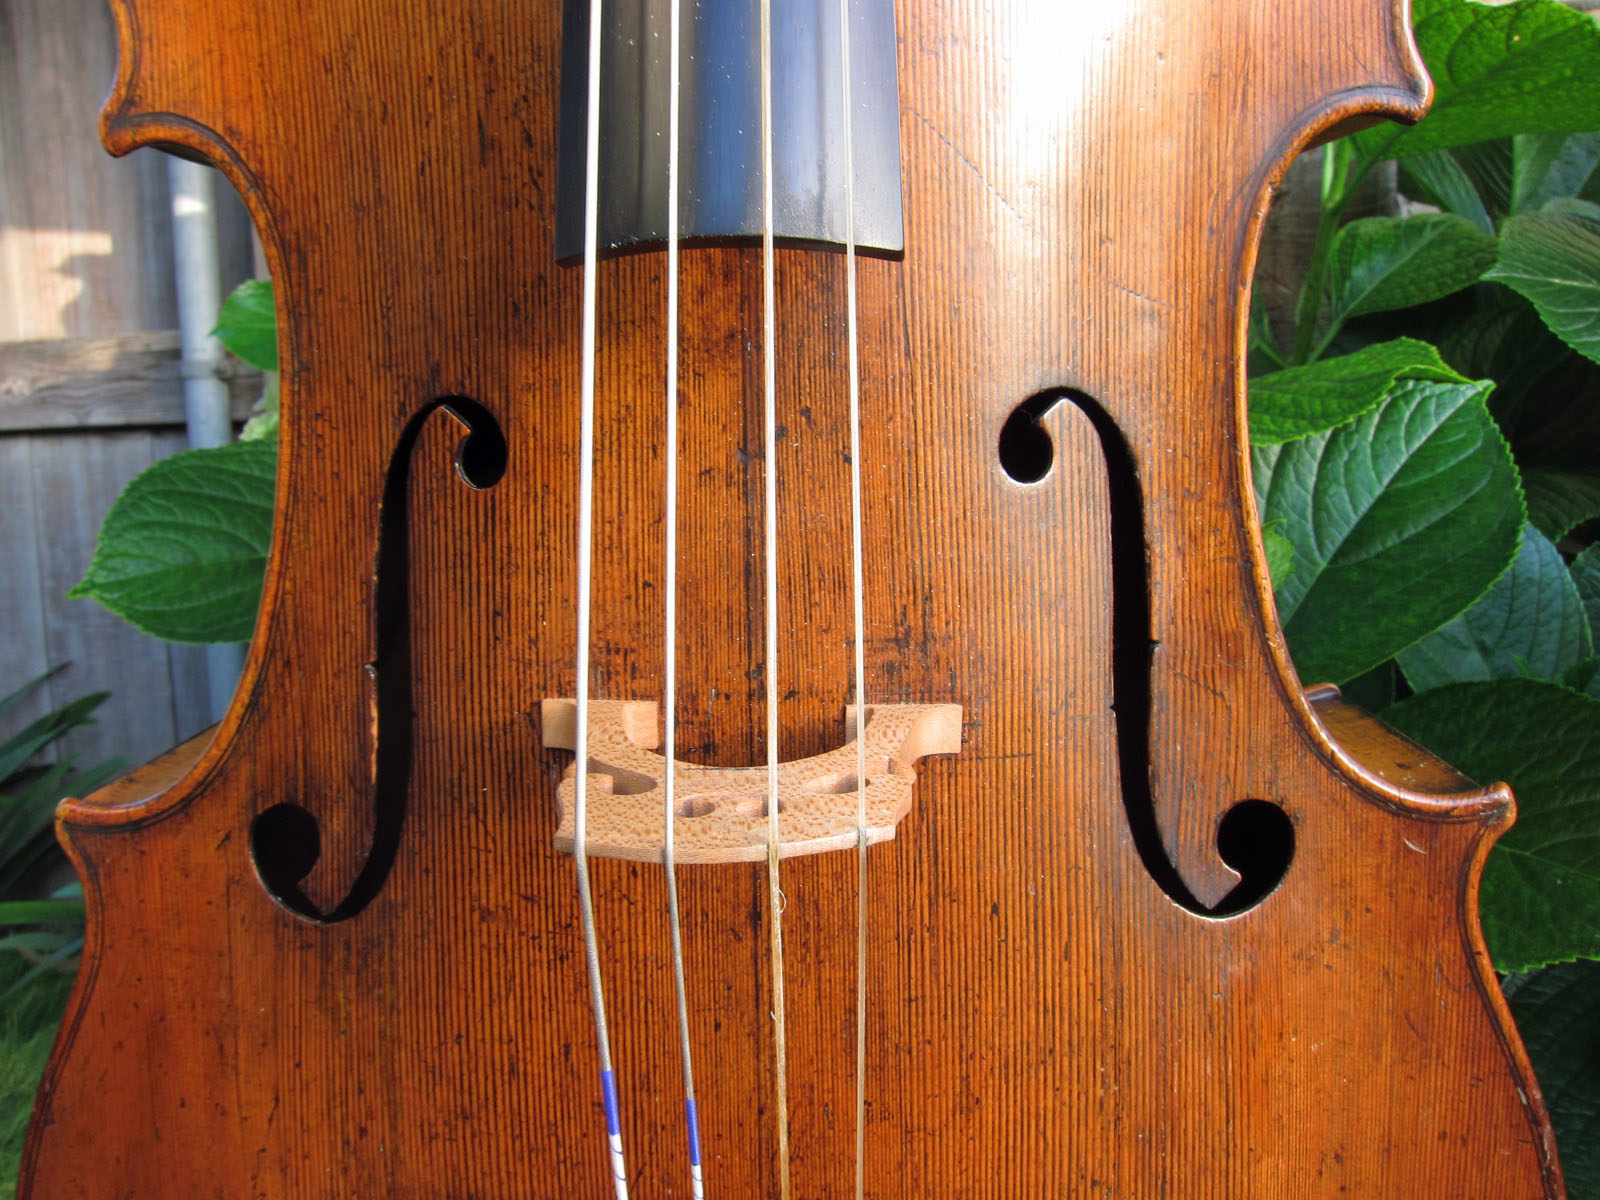 Things to Consider Before Purchasing an Antique Instrument